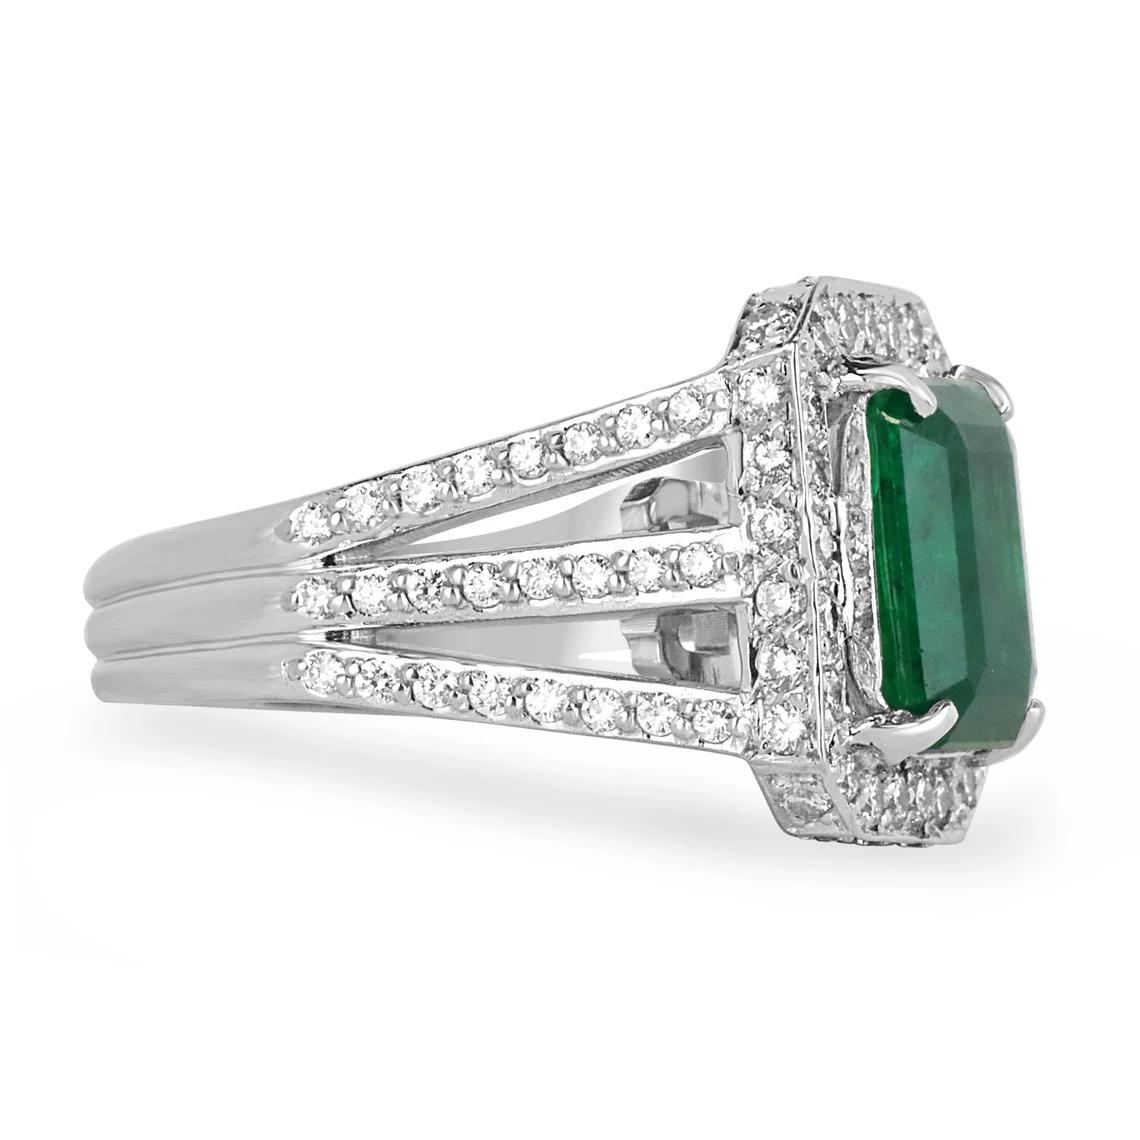 A luxurious emerald and diamond cocktail ring. This remarkable masterpiece features a large, fine-quality natural emerald cut emerald from the origin of Zambia. The gemstone showcases a rich dark emerald-green color, excellent-very good clarity,